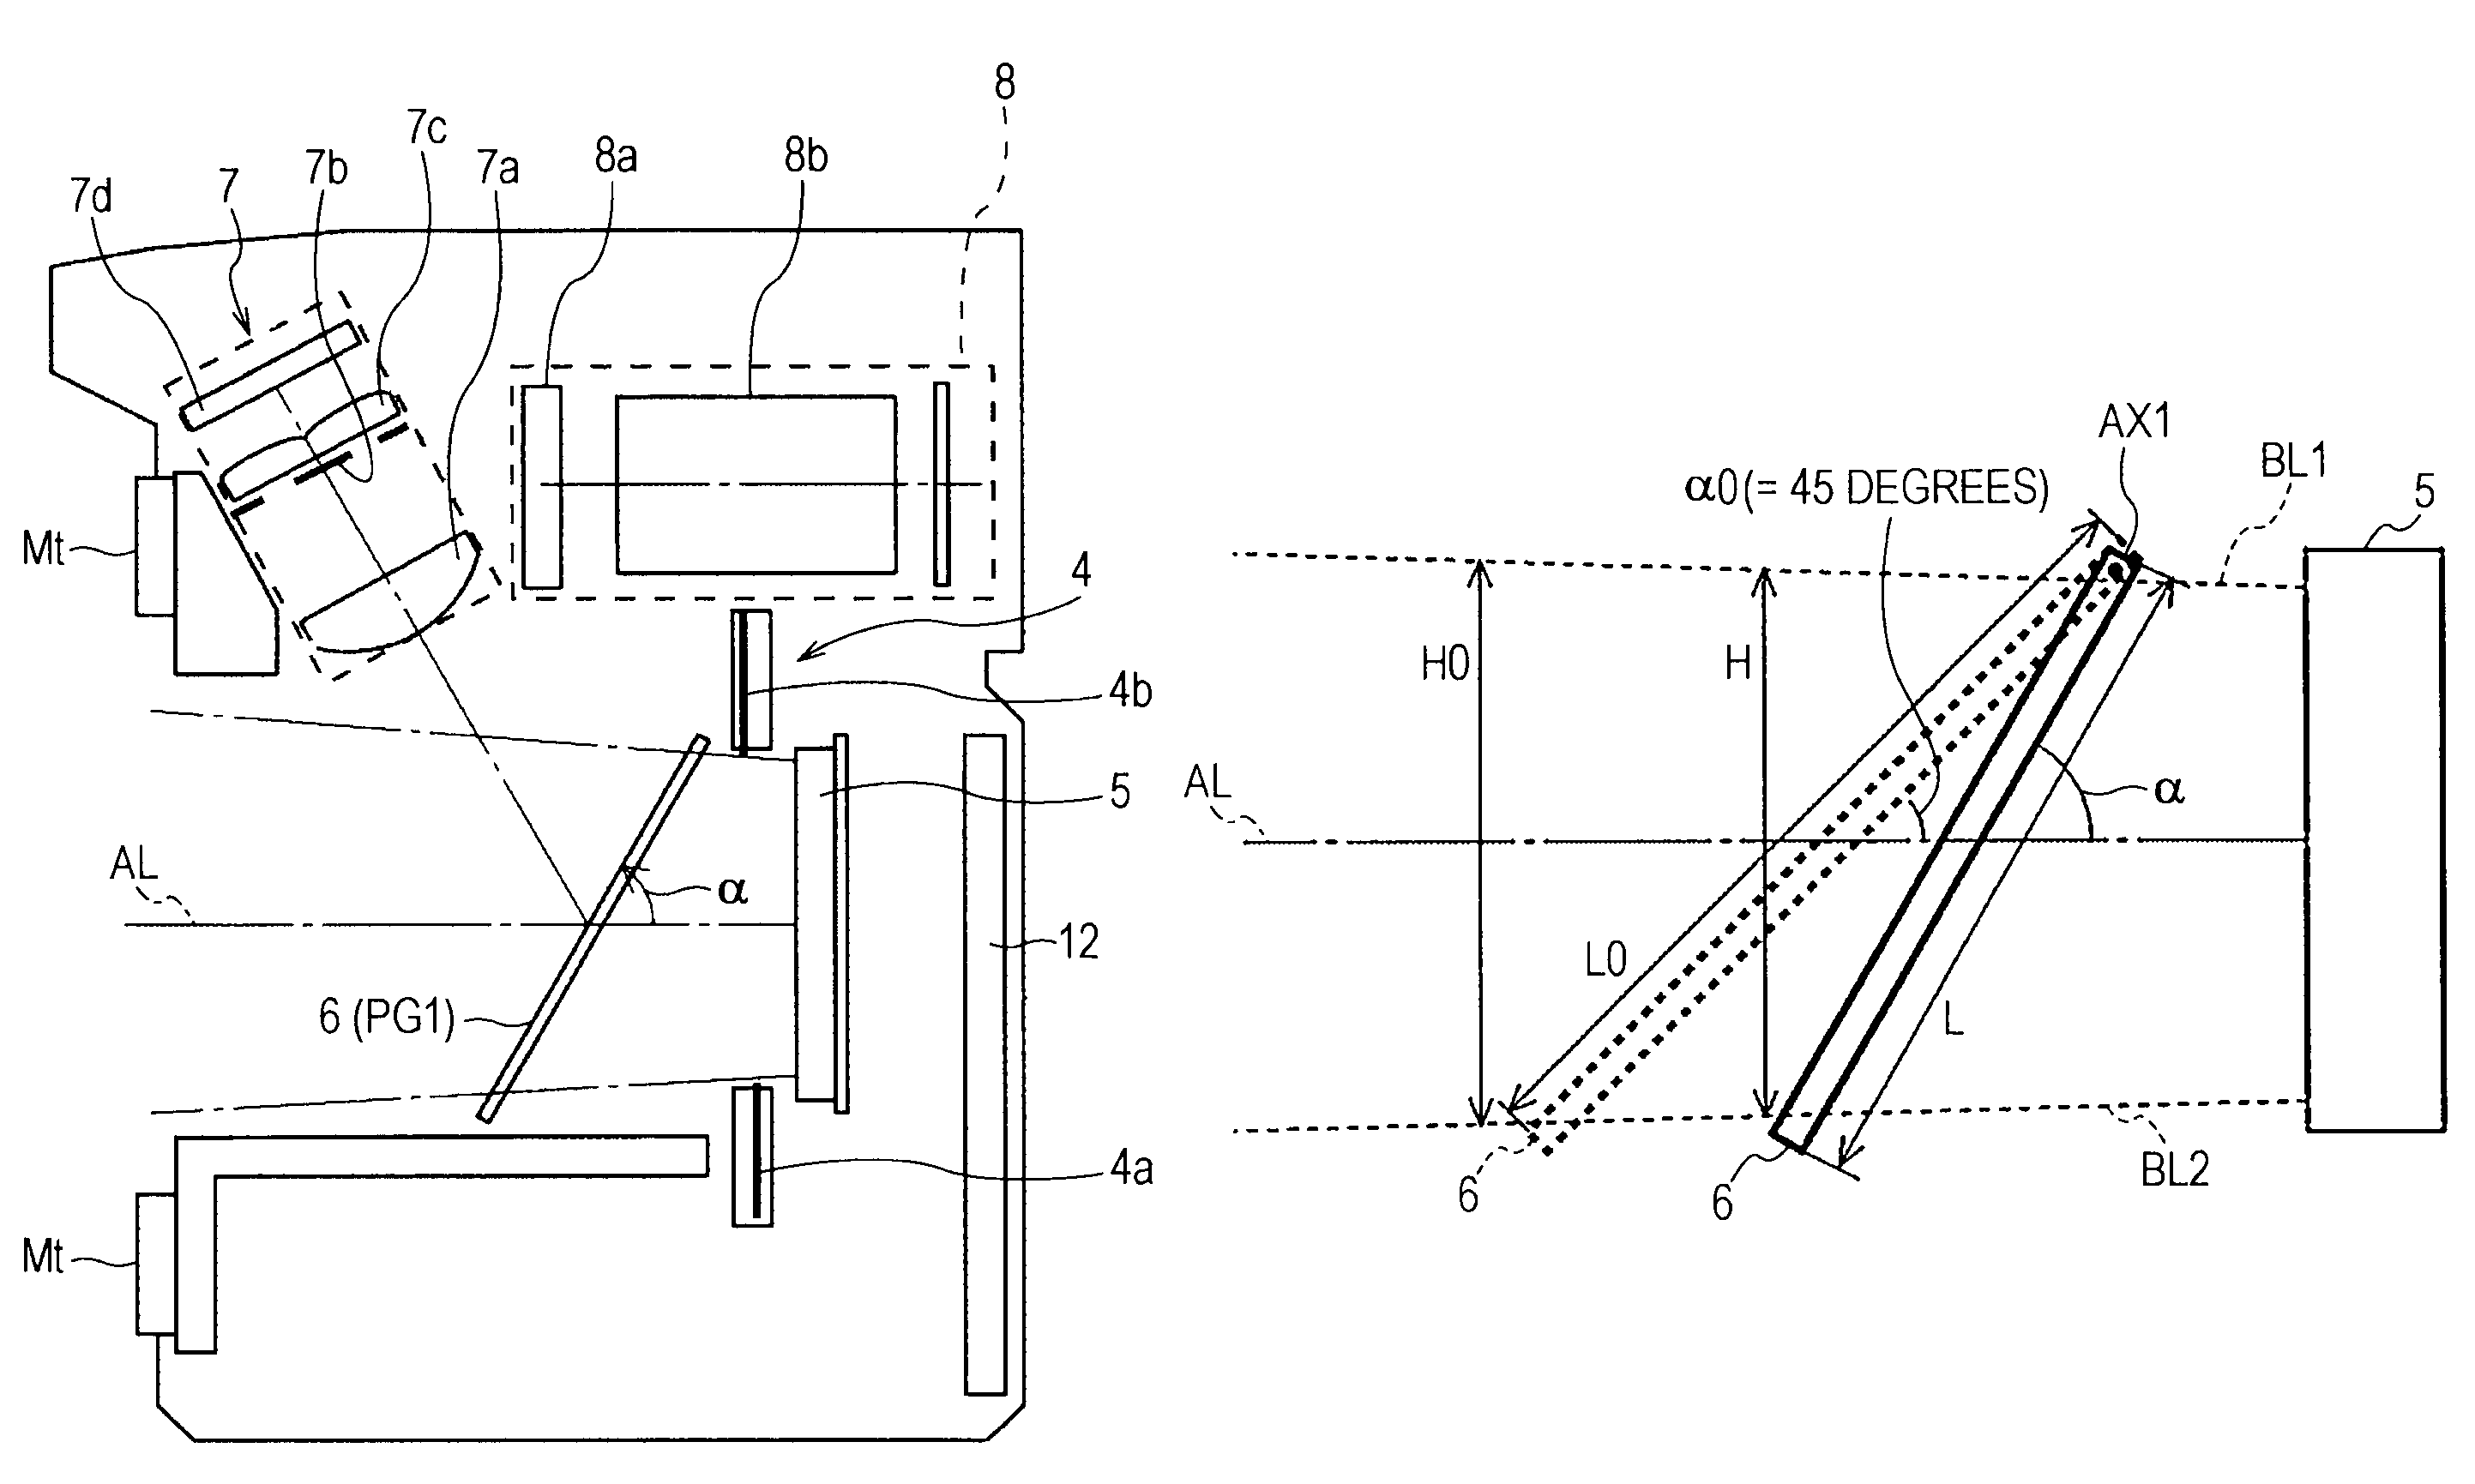 Image pickup apparatus with movable half mirror for auto focusing